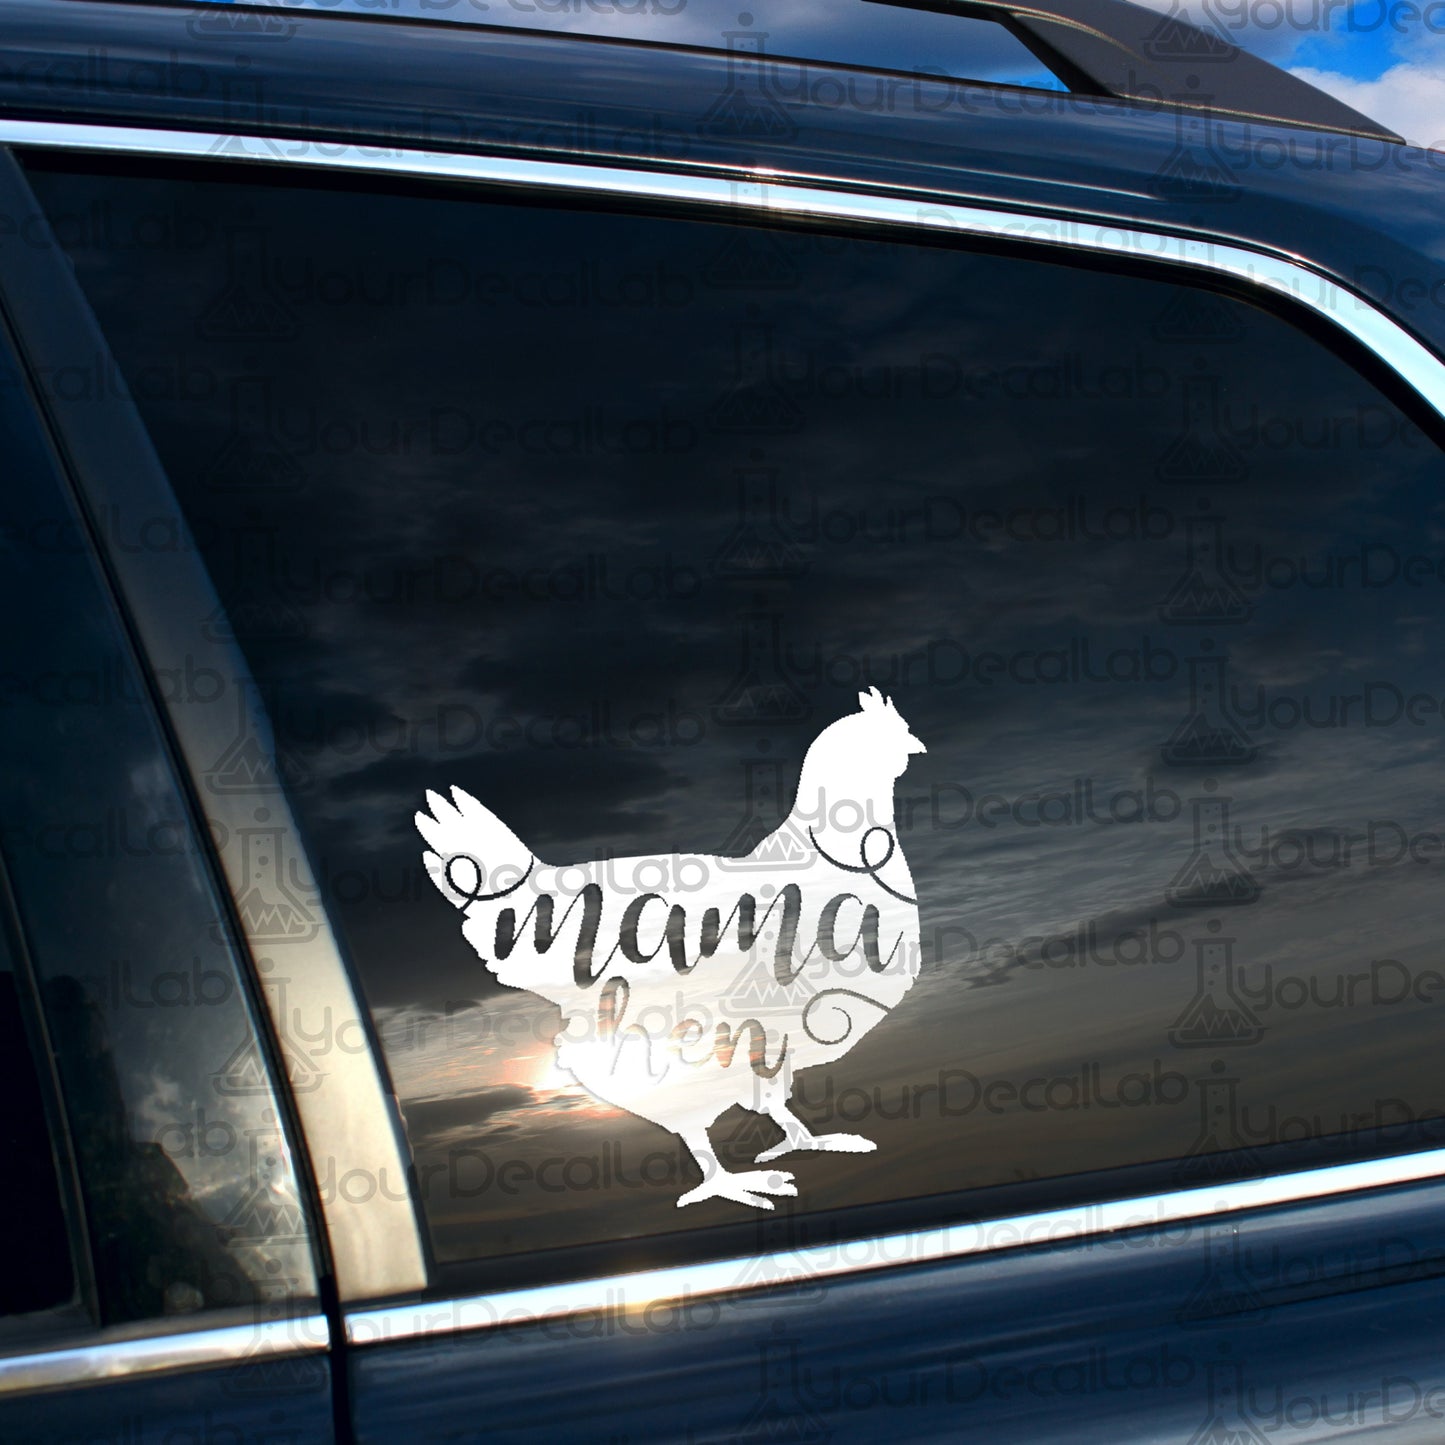 a sticker of a chicken on the side of a car